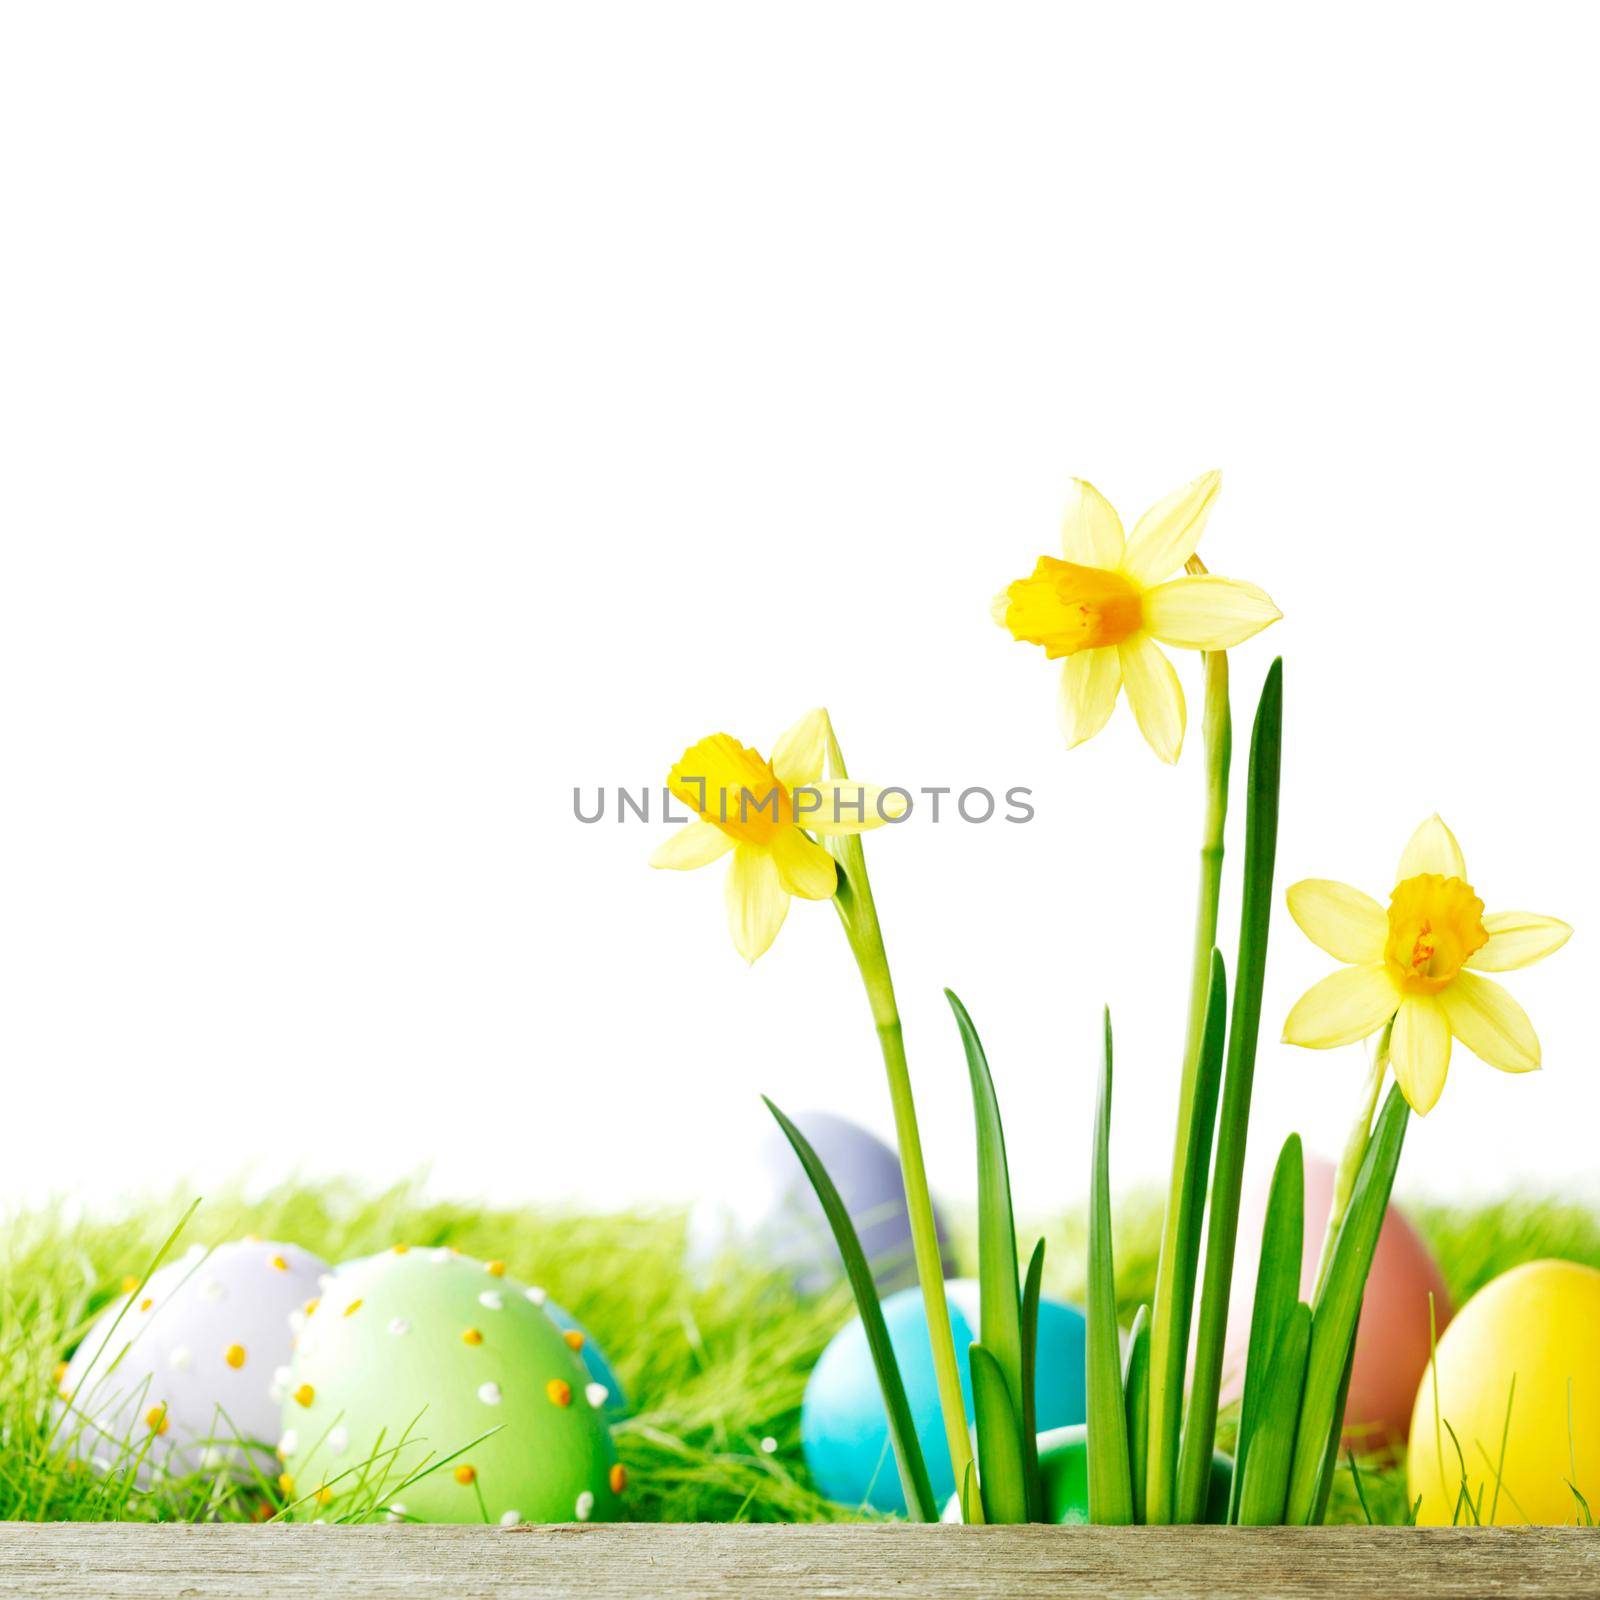 Yellow narcissus Flowers and easter eggs on spring grass background